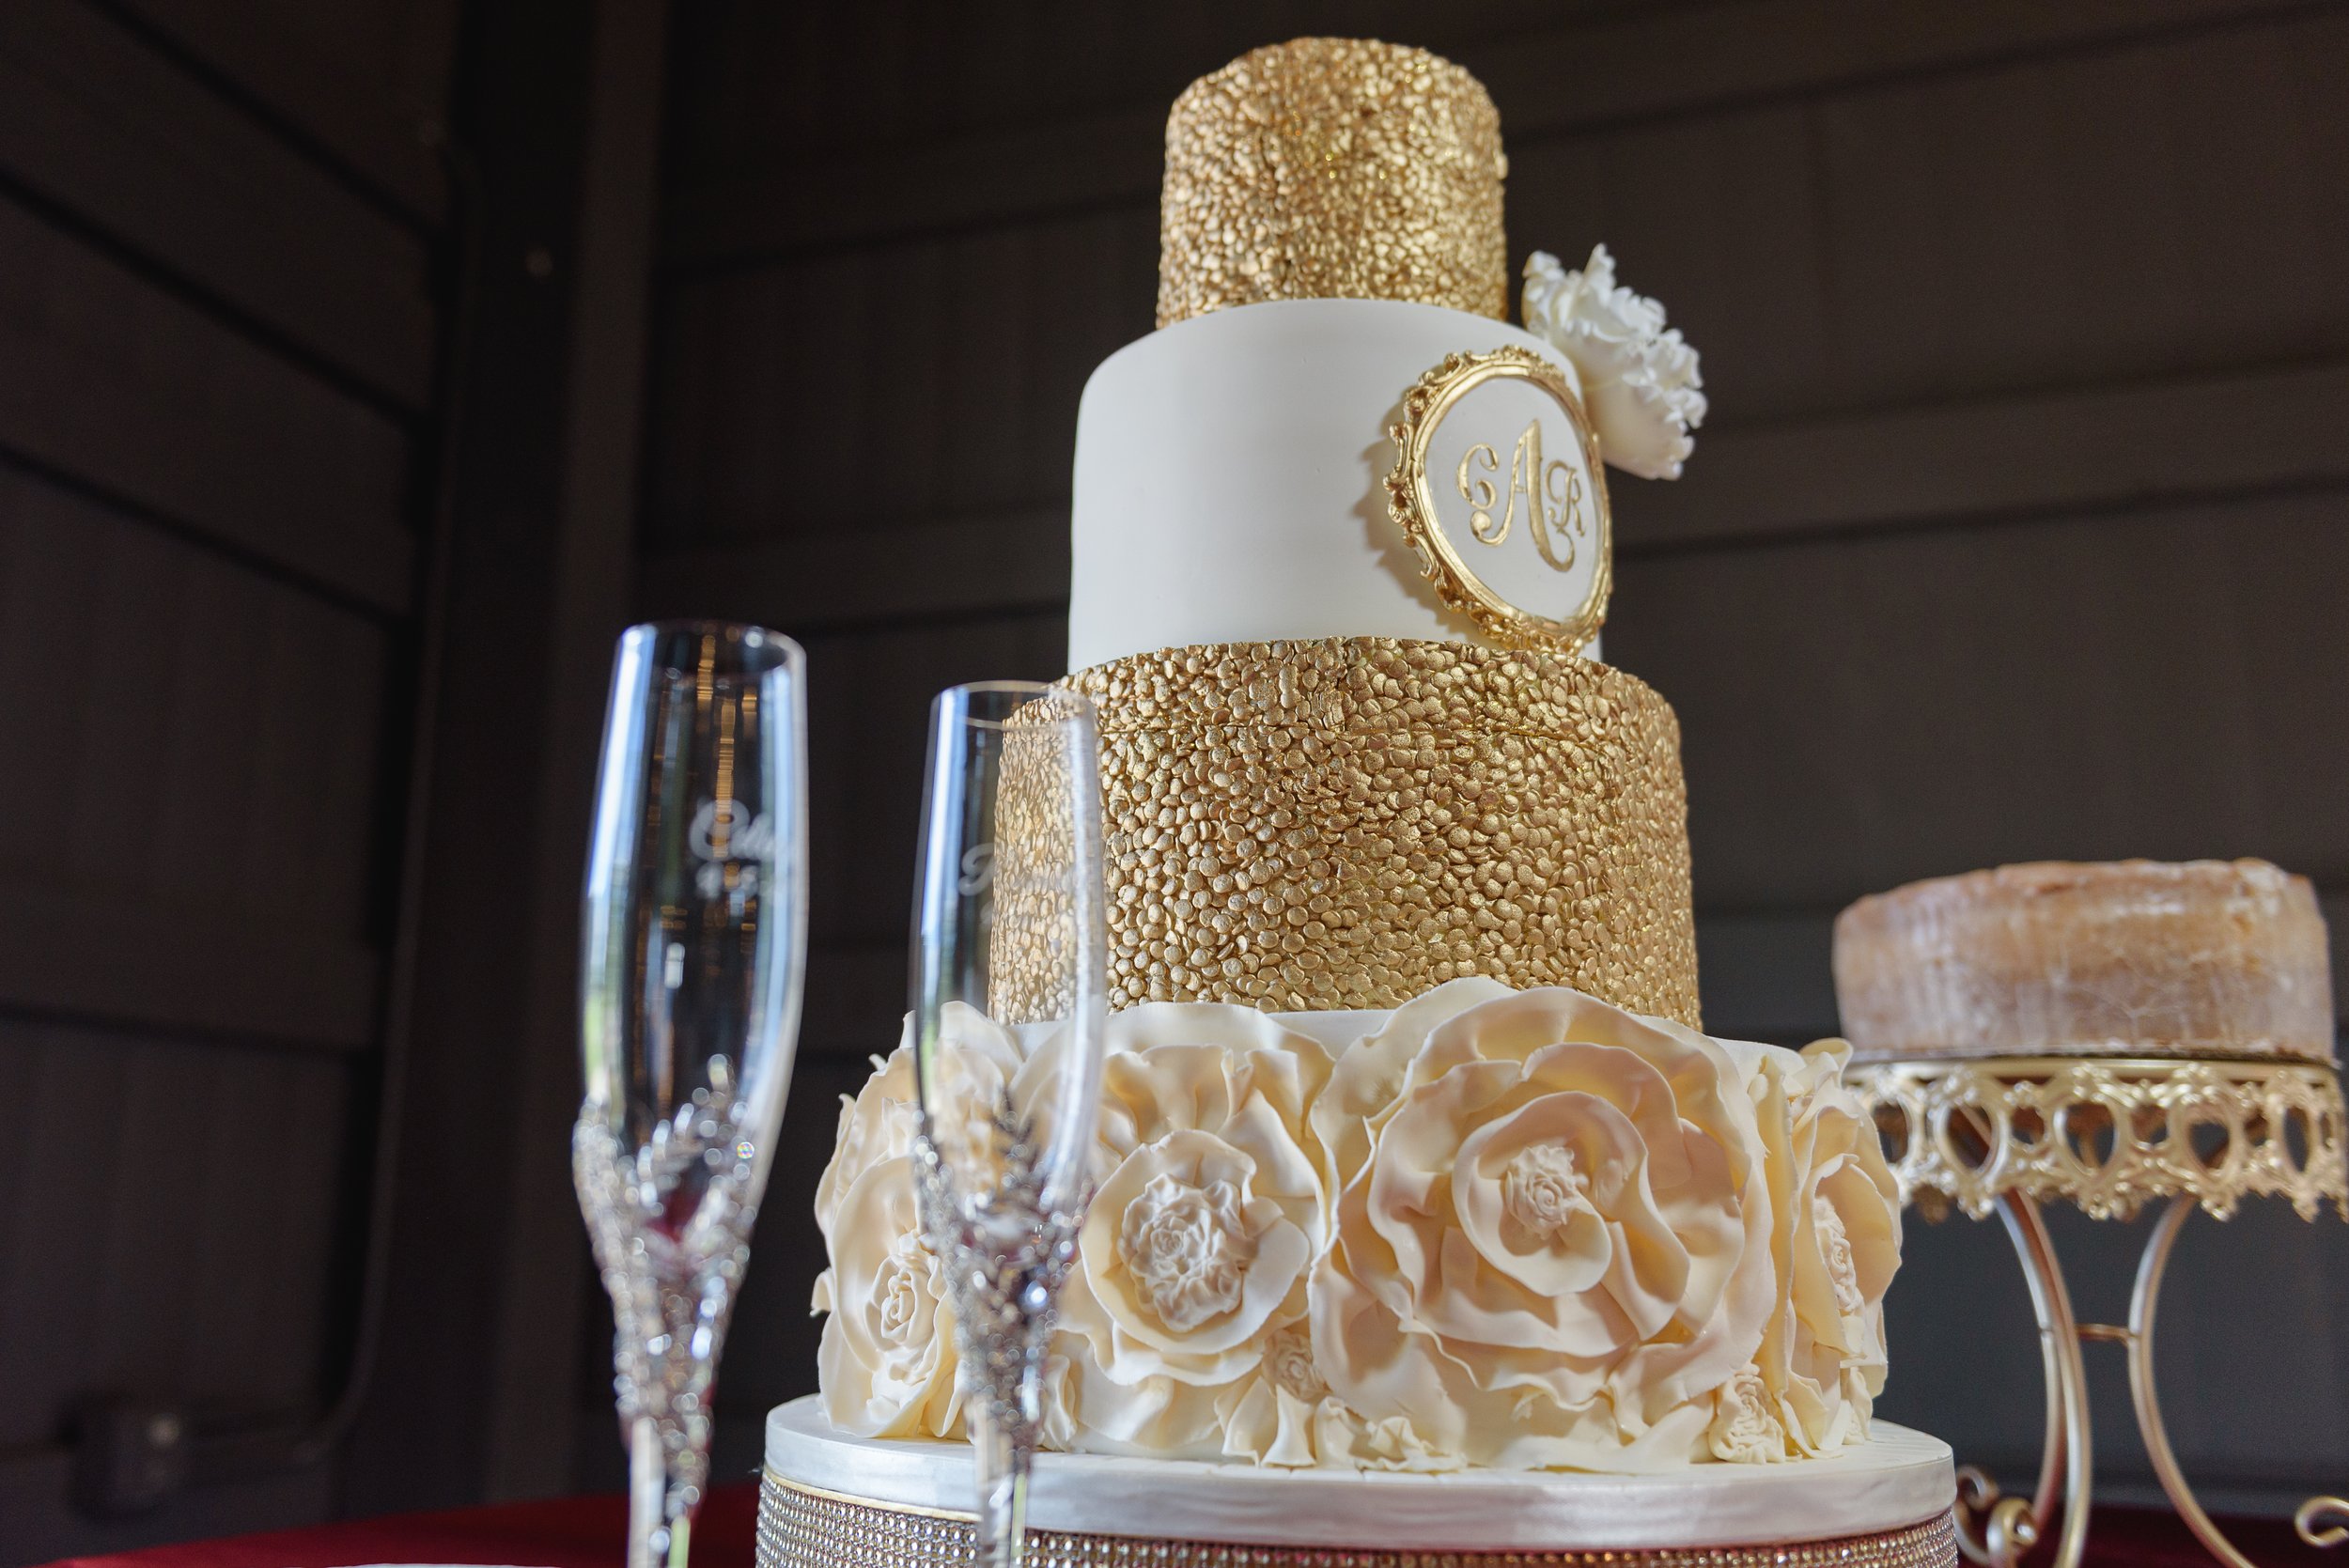 Custom white and gold wedding cake displayed for a wedding day in Georgia